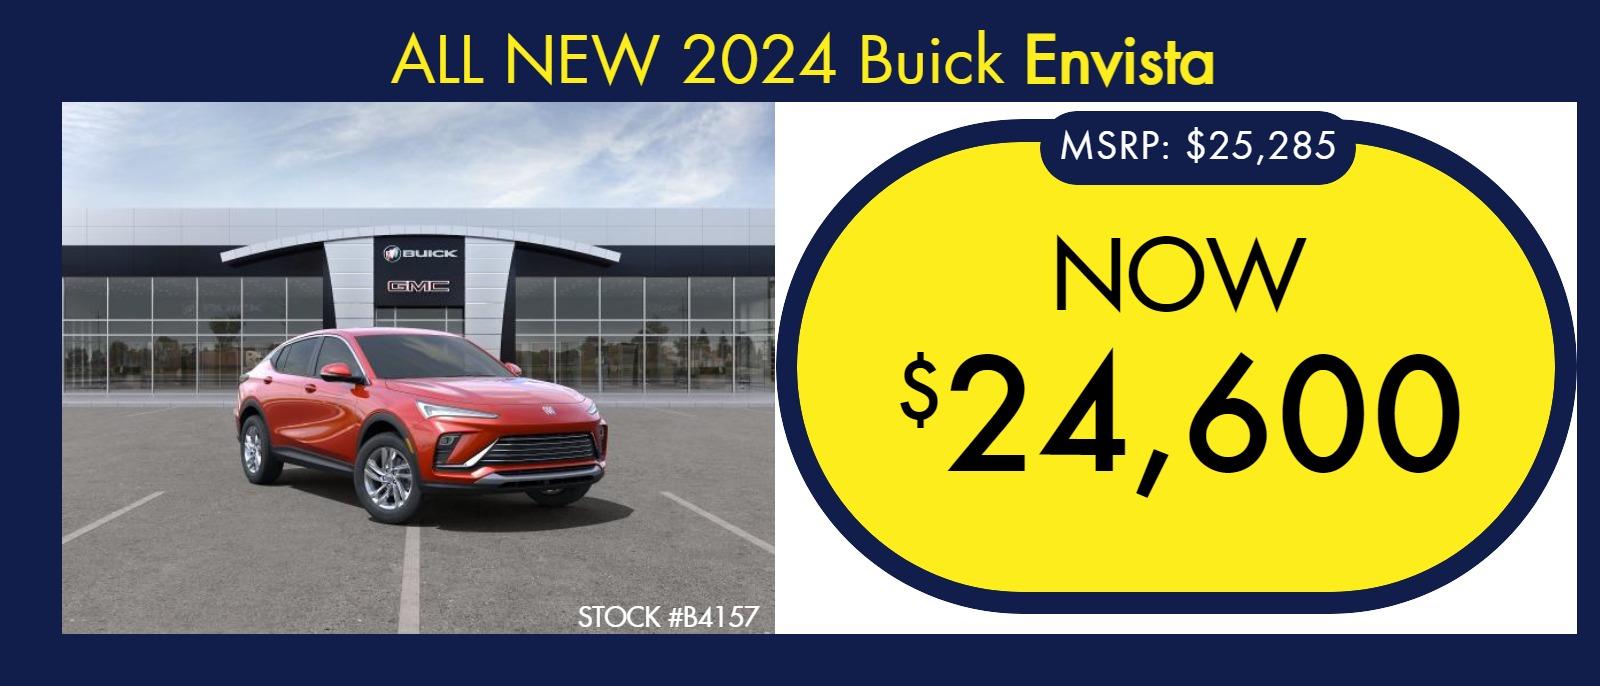 2024 Buick Envista
Stock #B4157
MSRP $25,285
NOW $24,600